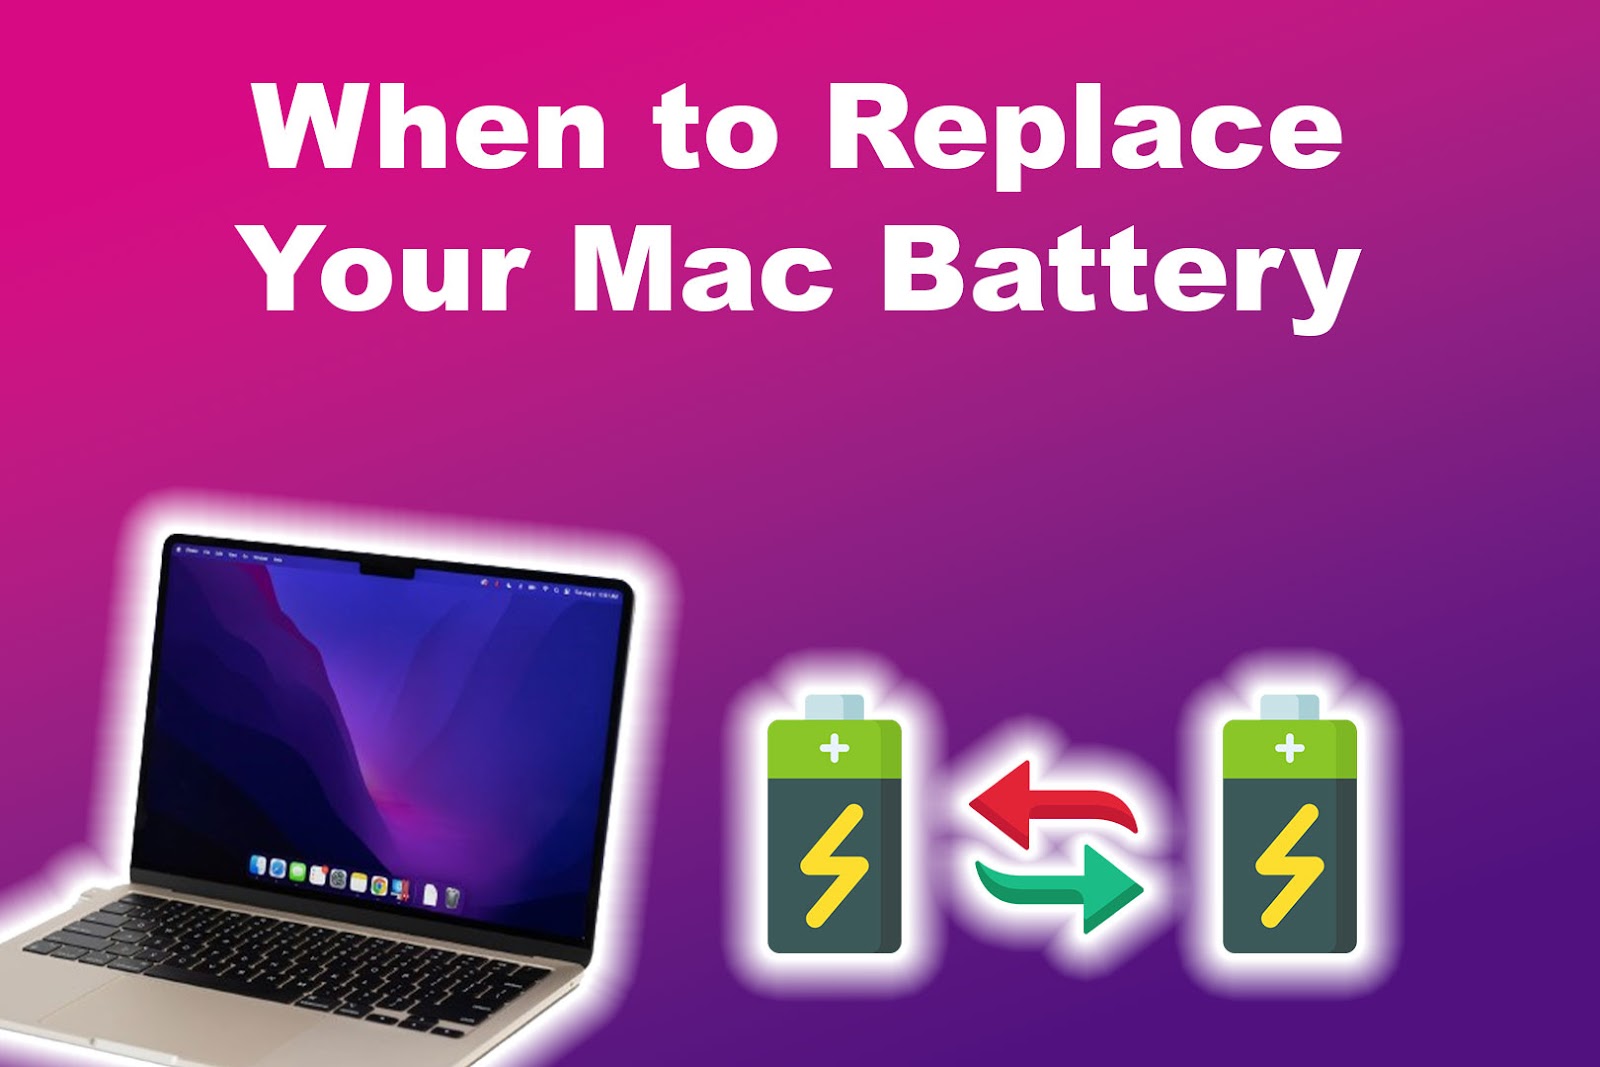 When to Replace Your Mac Battery